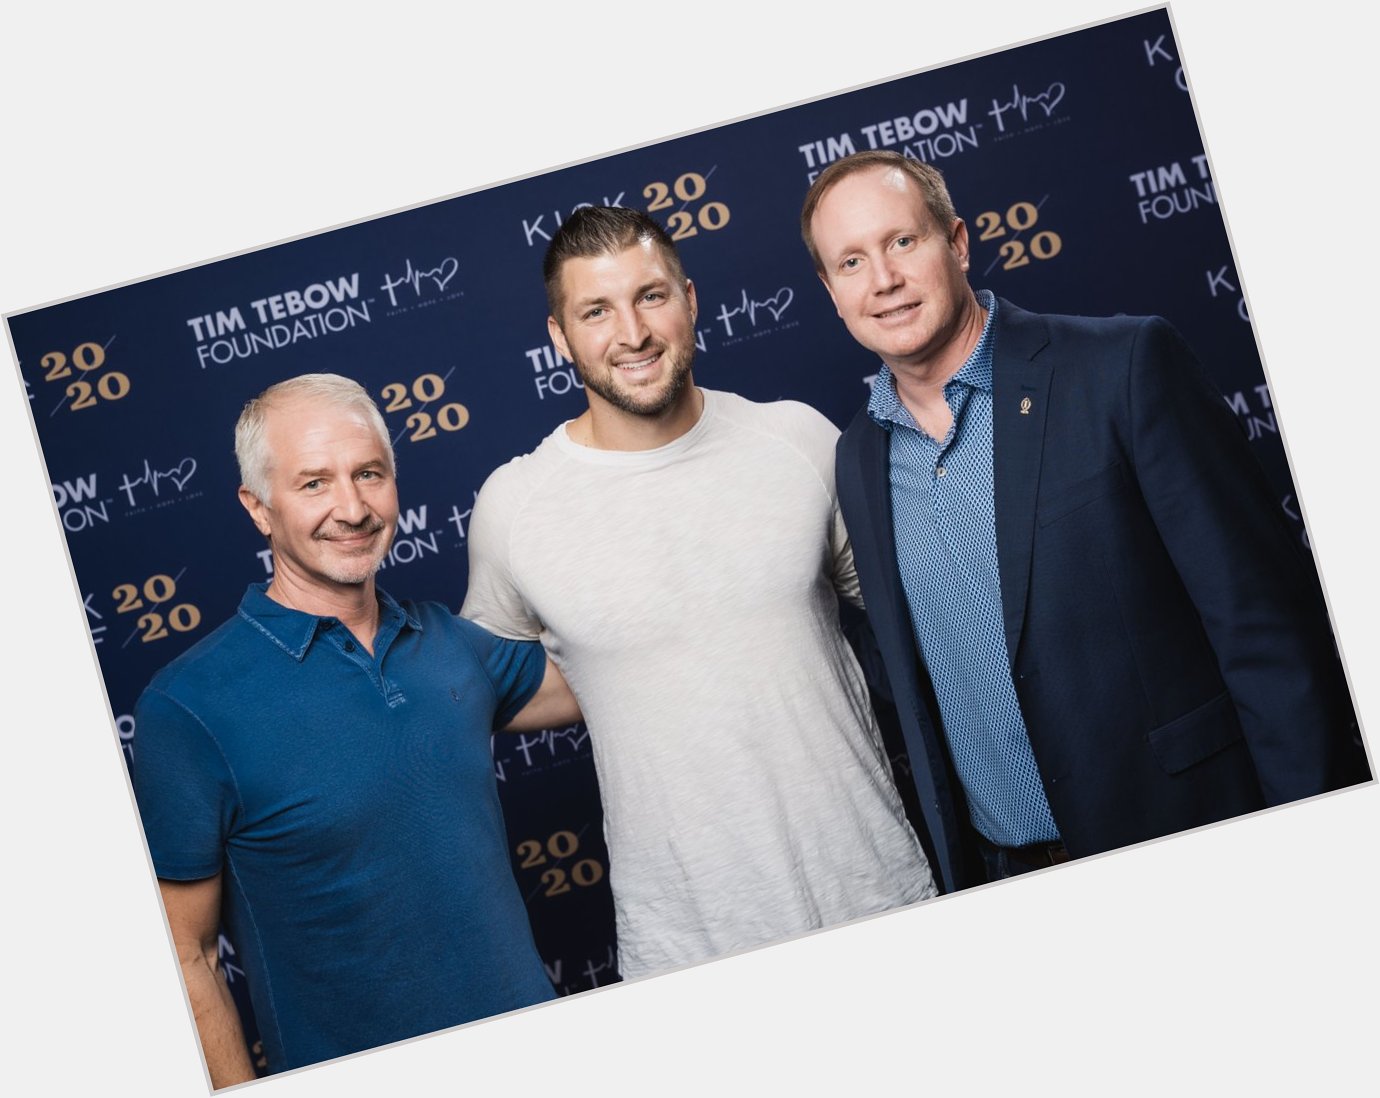 Wishing a very happy birthday to Tim Tebow! It was an honor to have him speak at our kickoff event in 2020! 